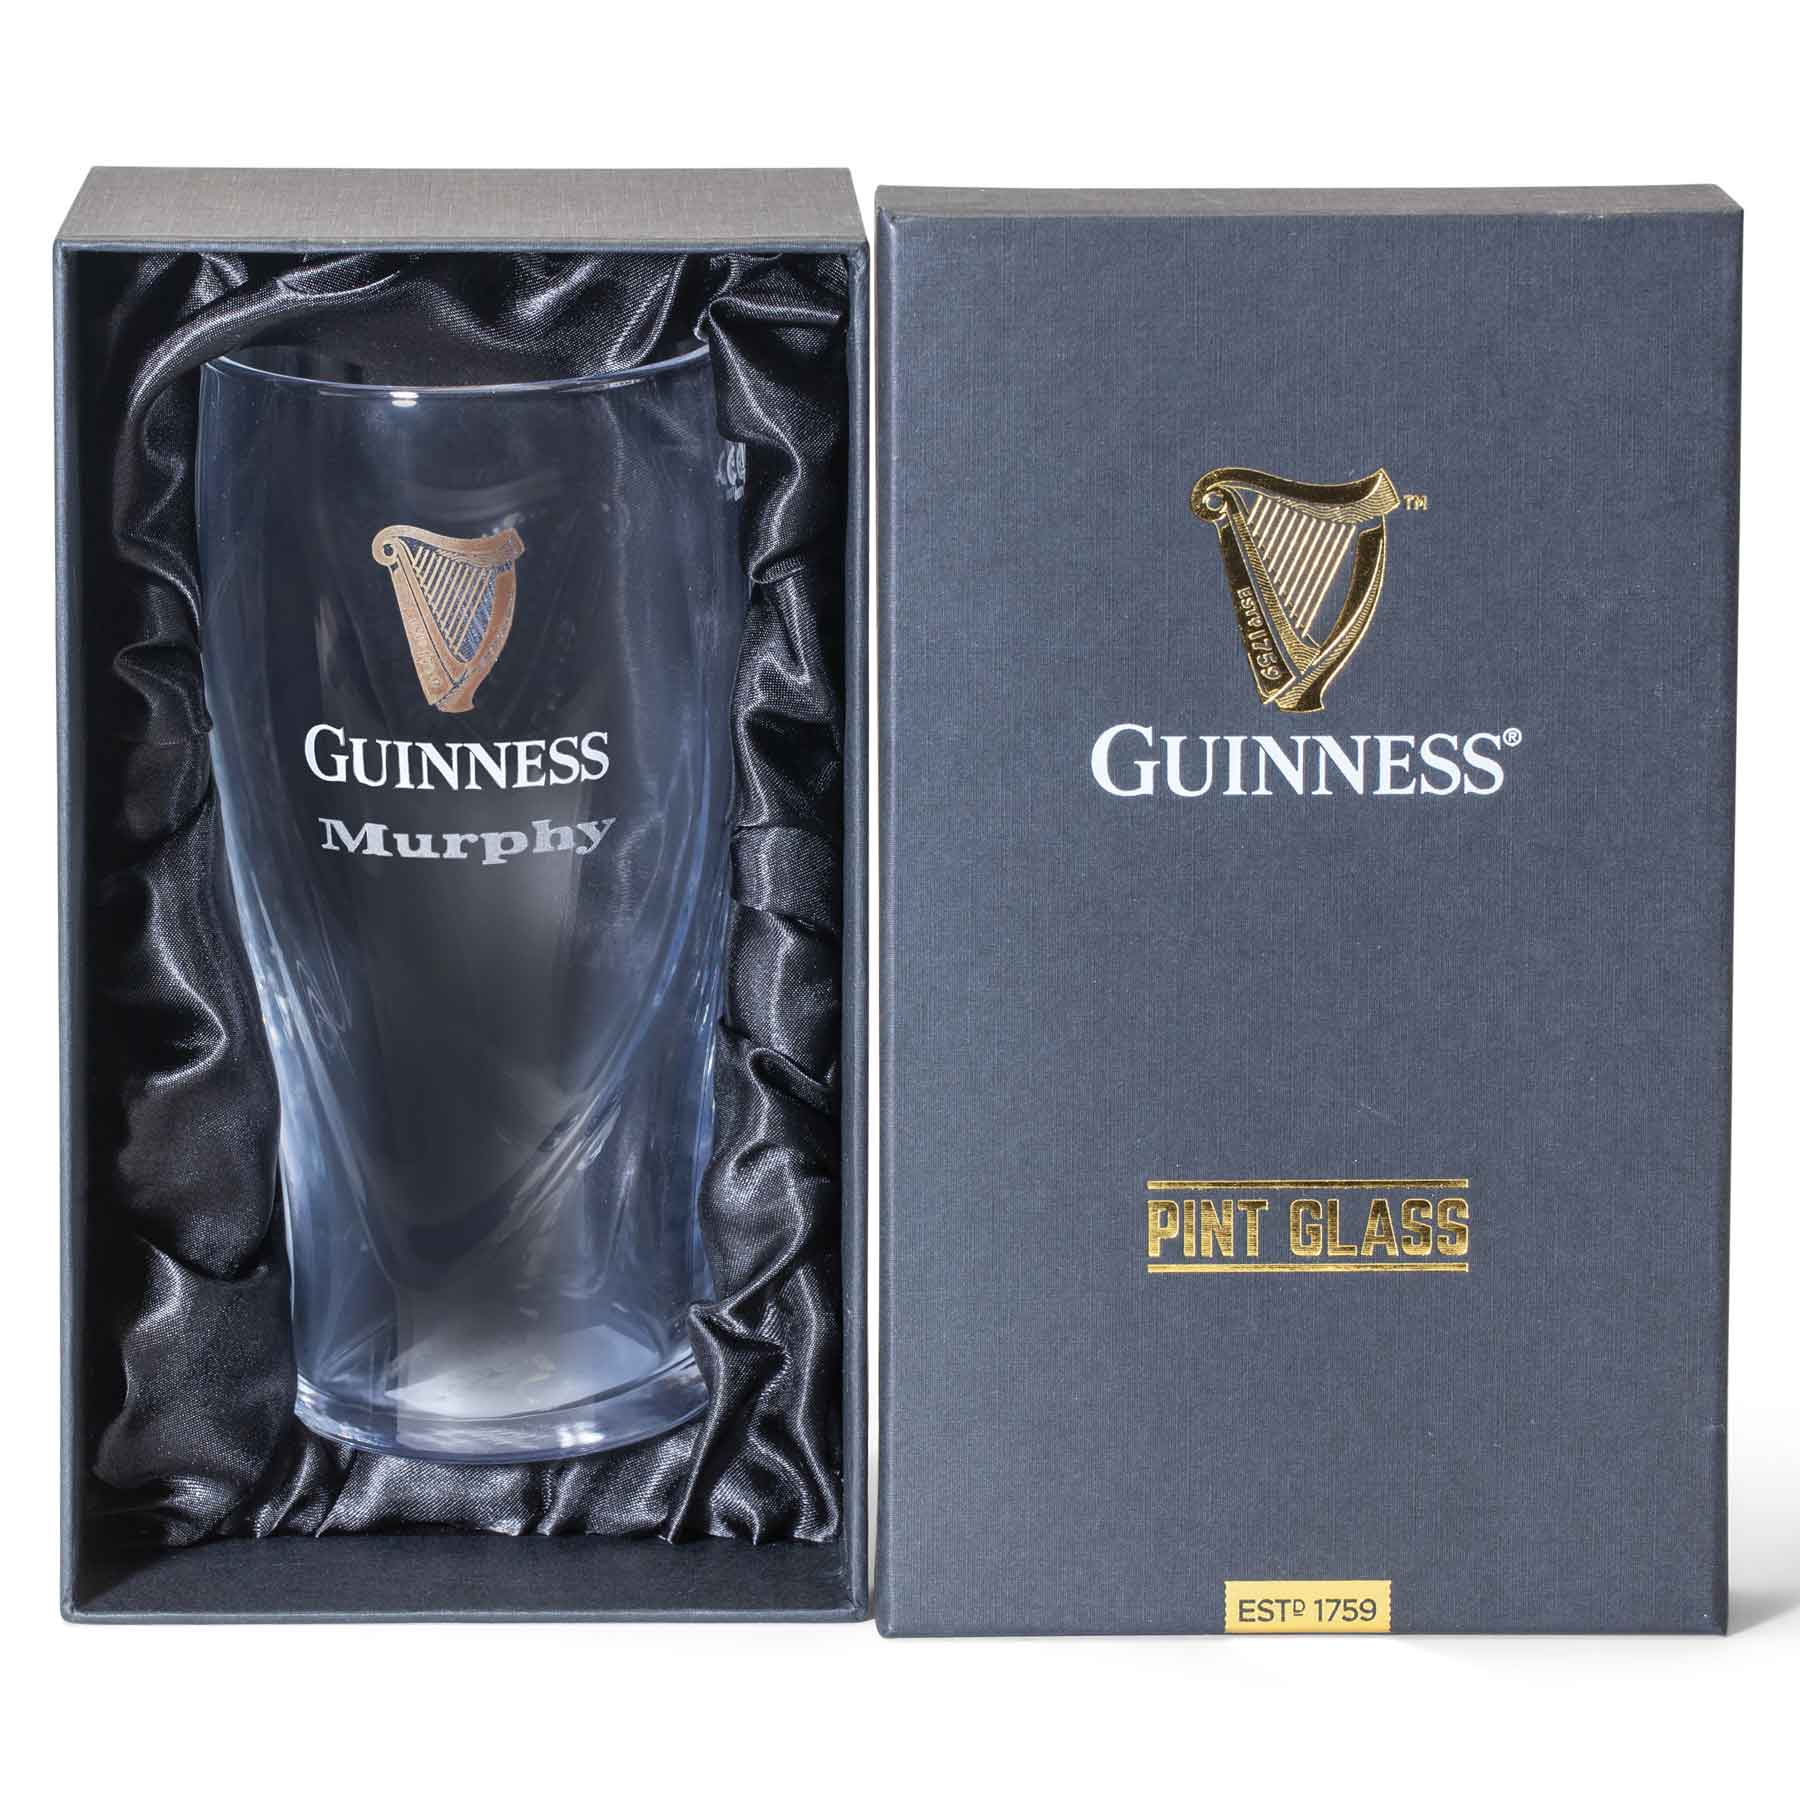 Bunratty Tavern - Want your very own personalized Guinness glass